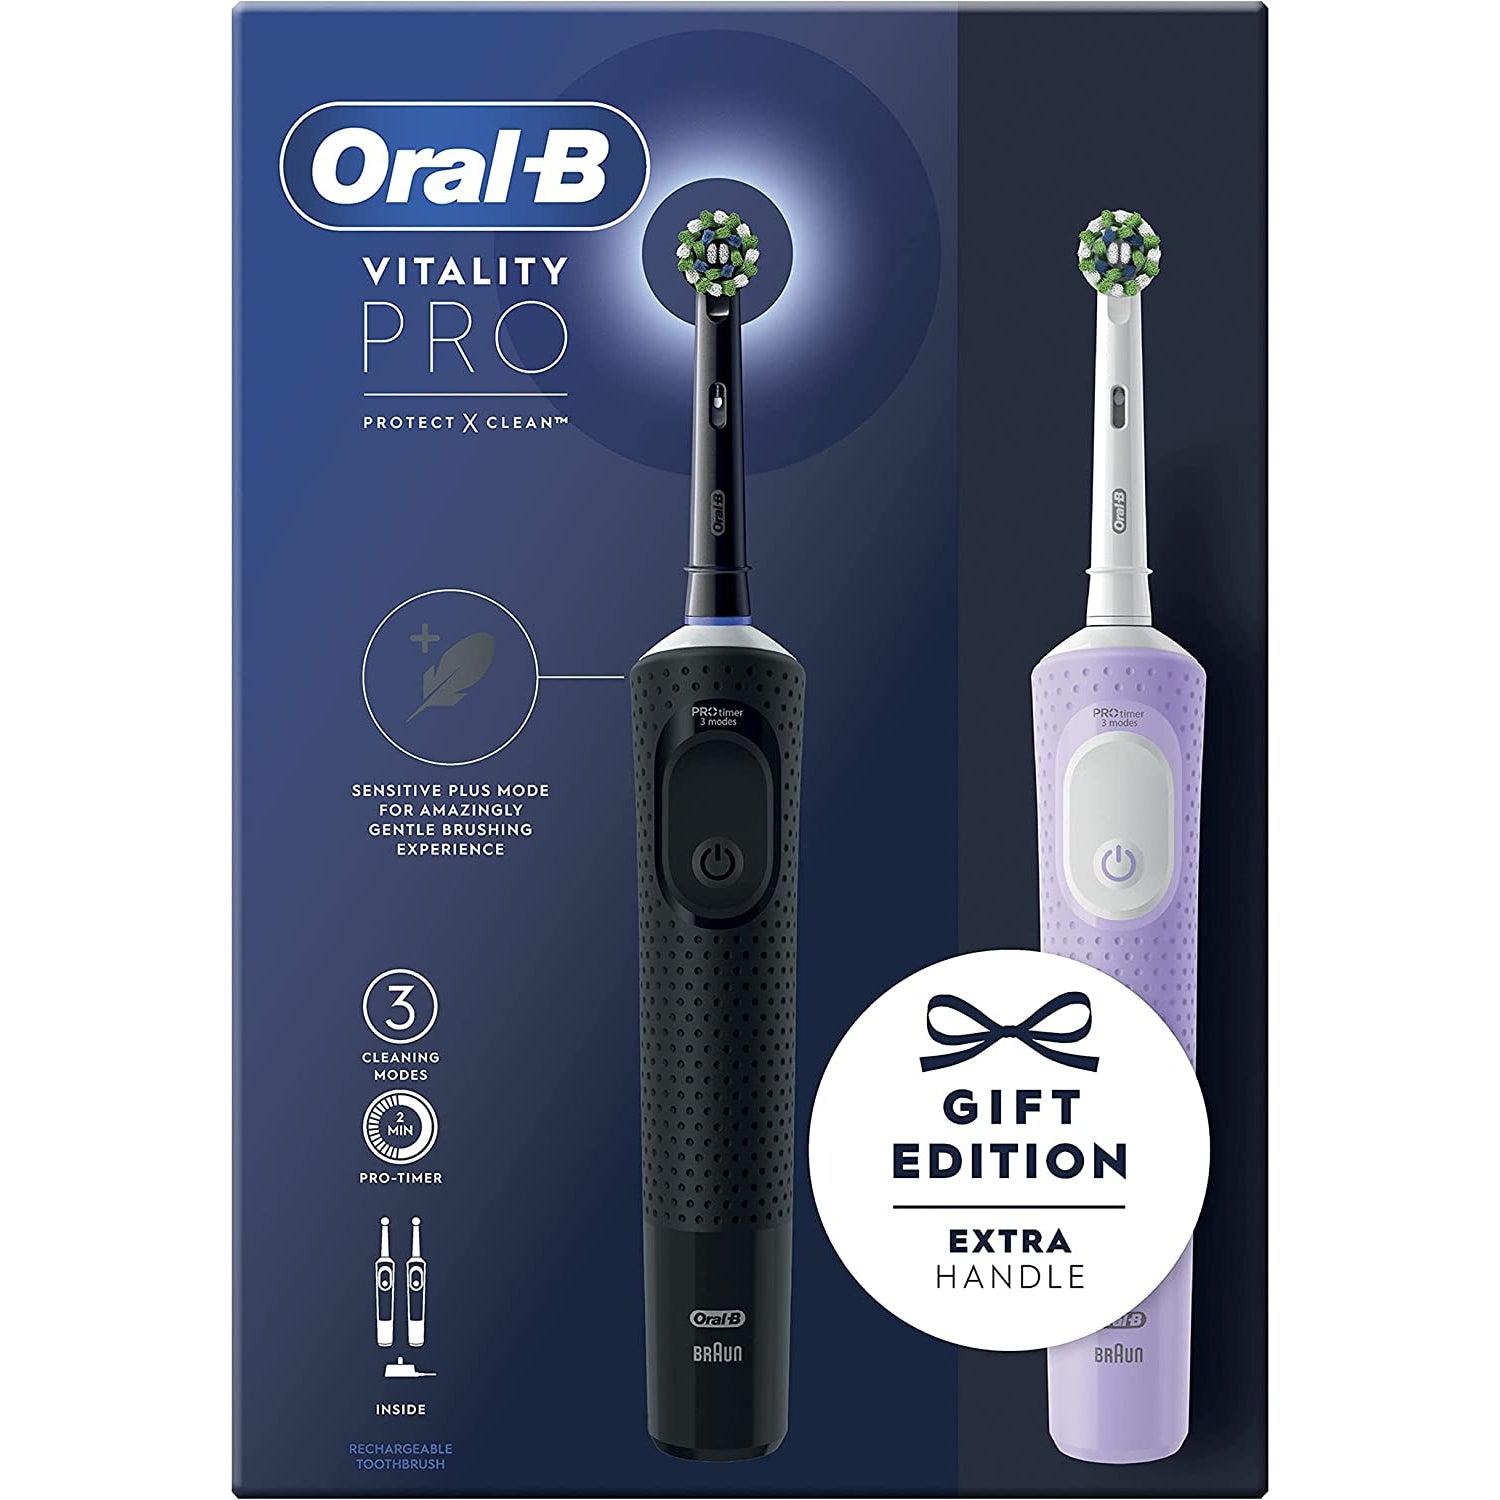 Oral-B Vitality Pro 2 x Electric Toothbrushes, 2 Toothbrush Heads, 3 Brushing Modes Including Sensitive Plus - Black & Purple - Healthxpress.ie